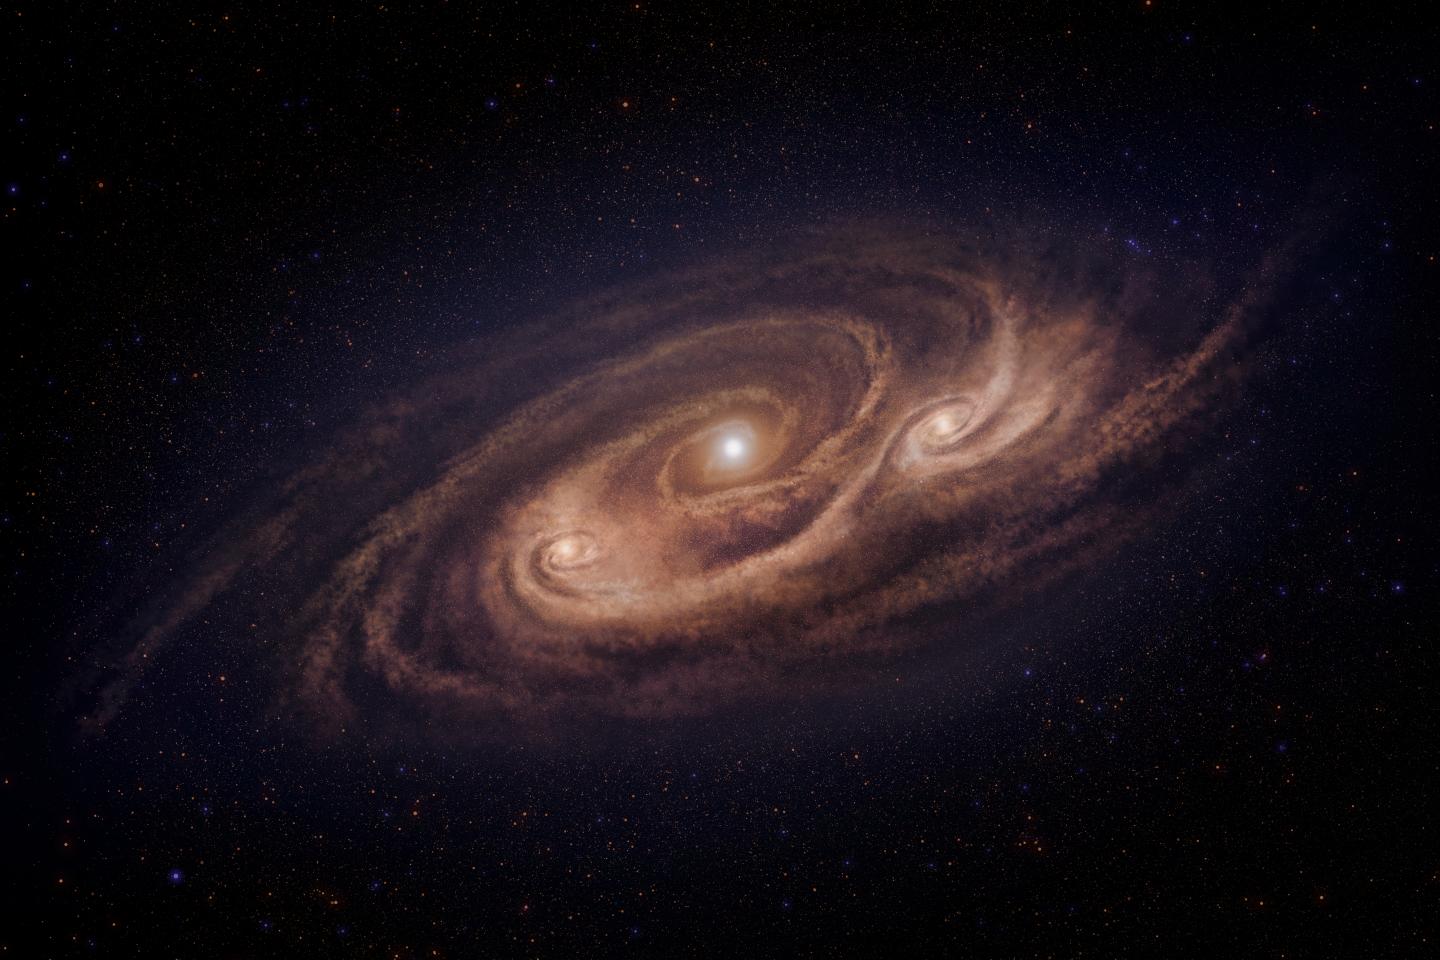 Artist's Impression of the Monster Galaxy COSMOS-AzTEC-1